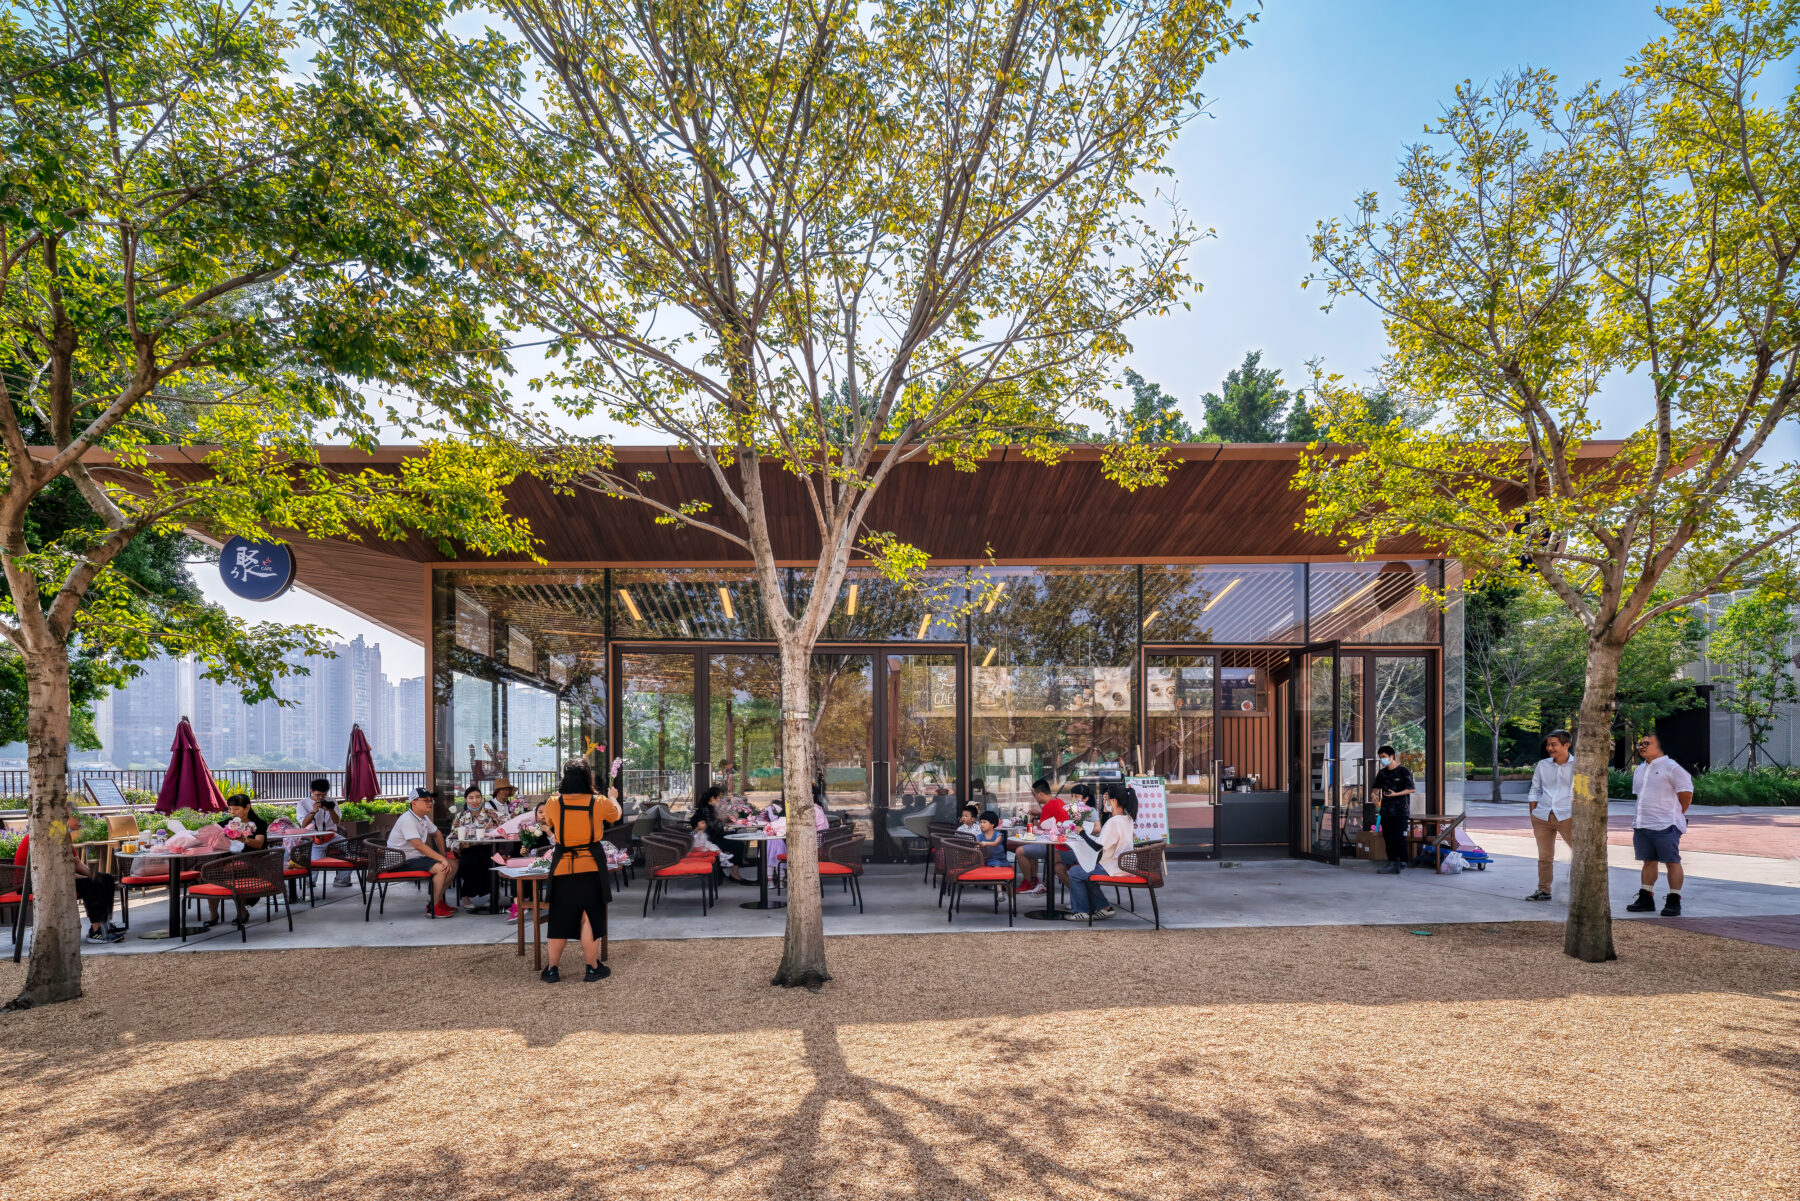 Photo of the new cafe building with people sitting at tables and view of the waterfront and city in the periphery.